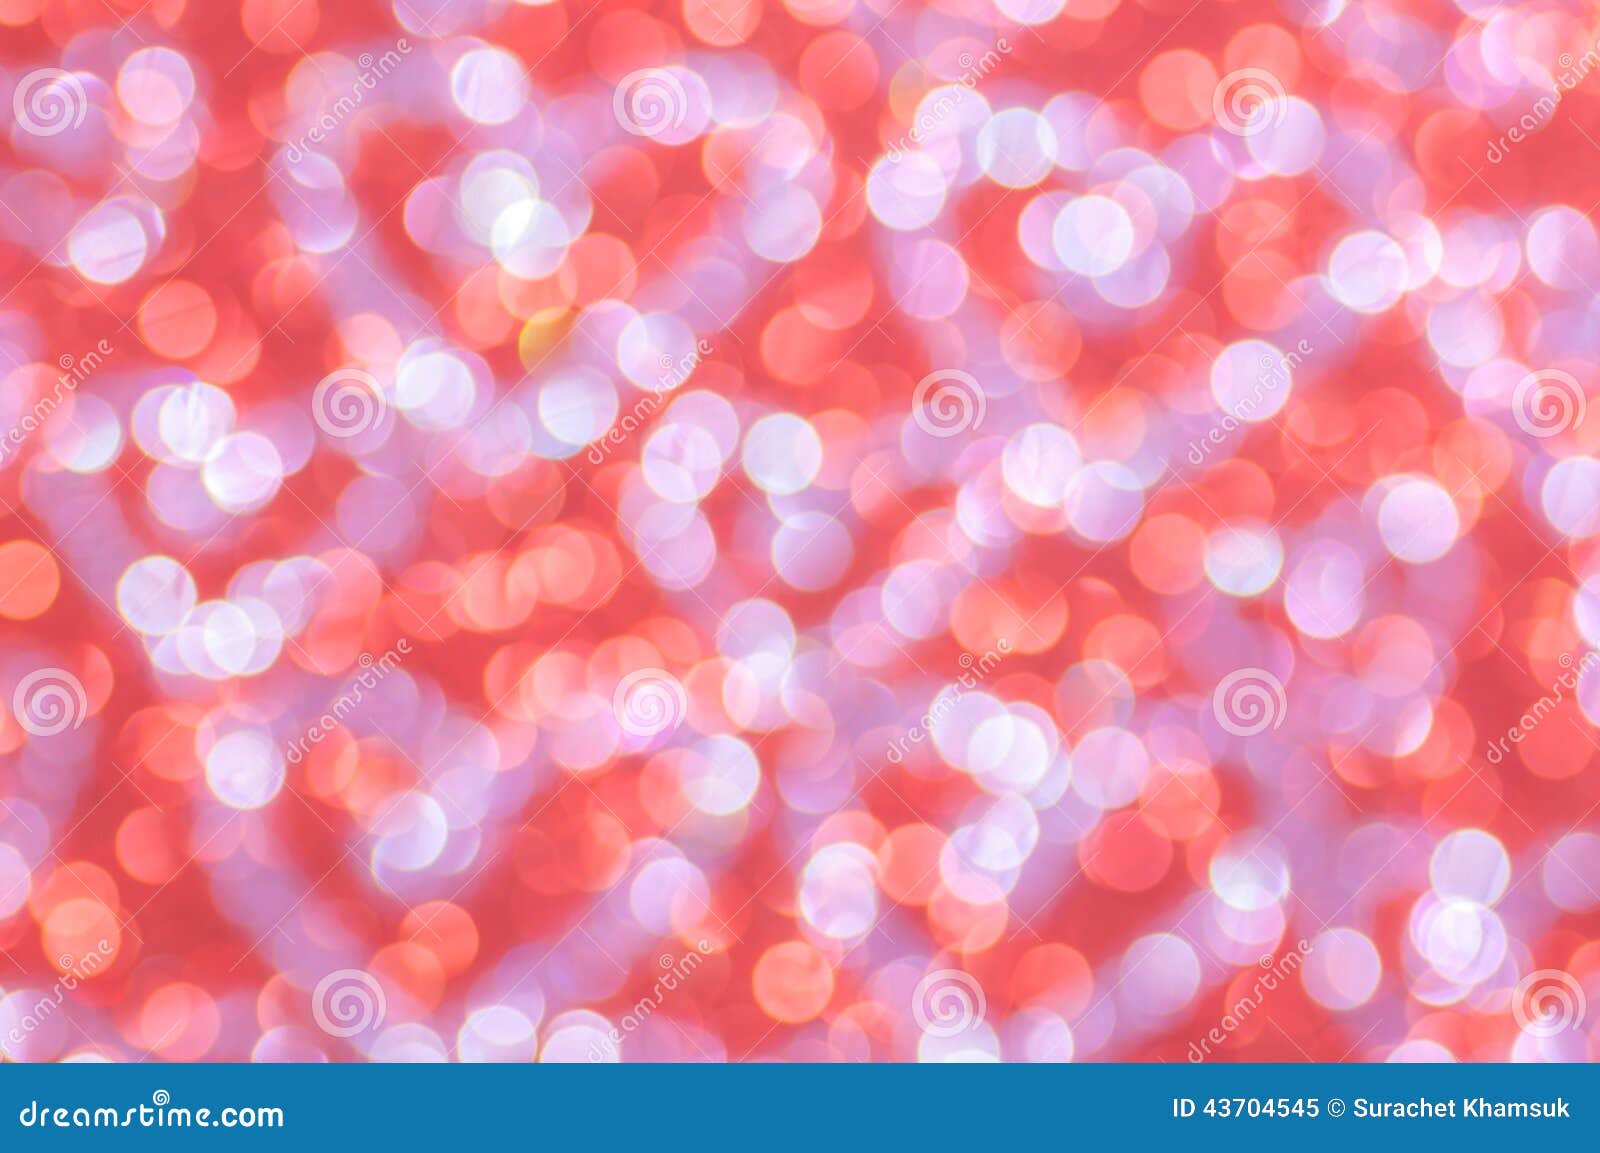 10,880 Red Glitter Backgrounds Stock Photos - Free & Royalty-Free Stock  Photos from Dreamstime